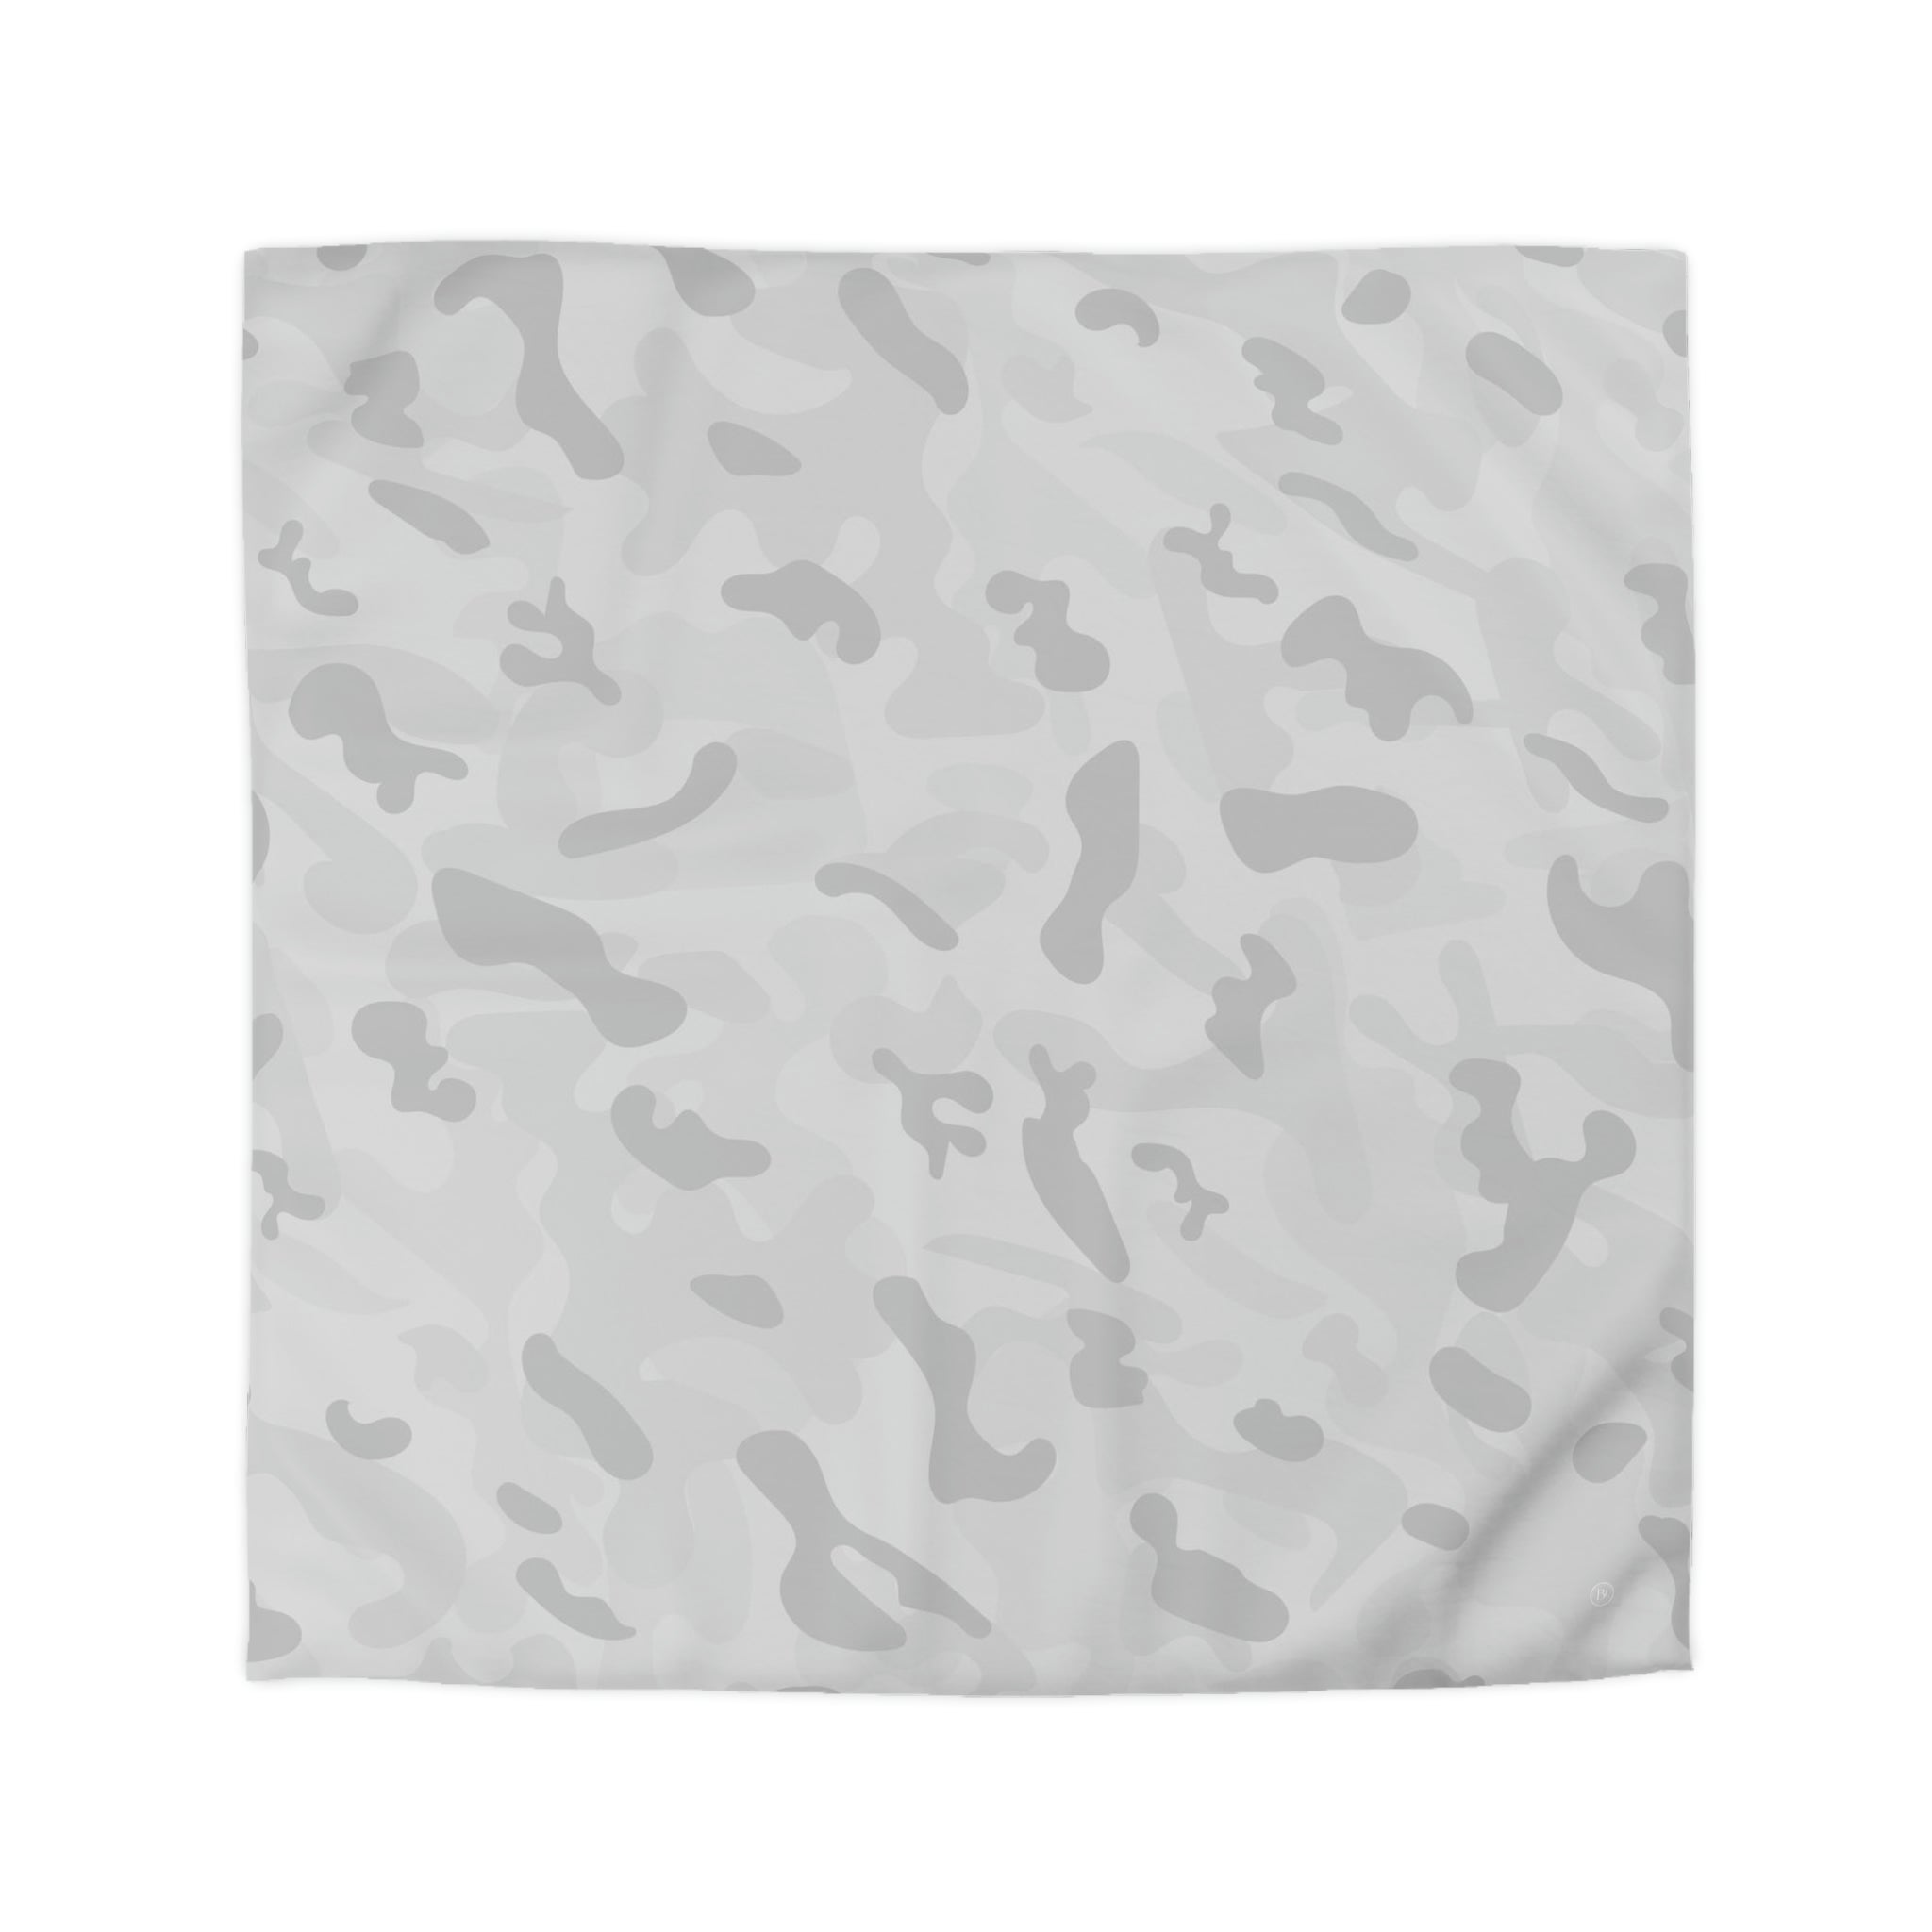 Home Decor Putty Gray Camouflage Duvet Cover Queen / Cream